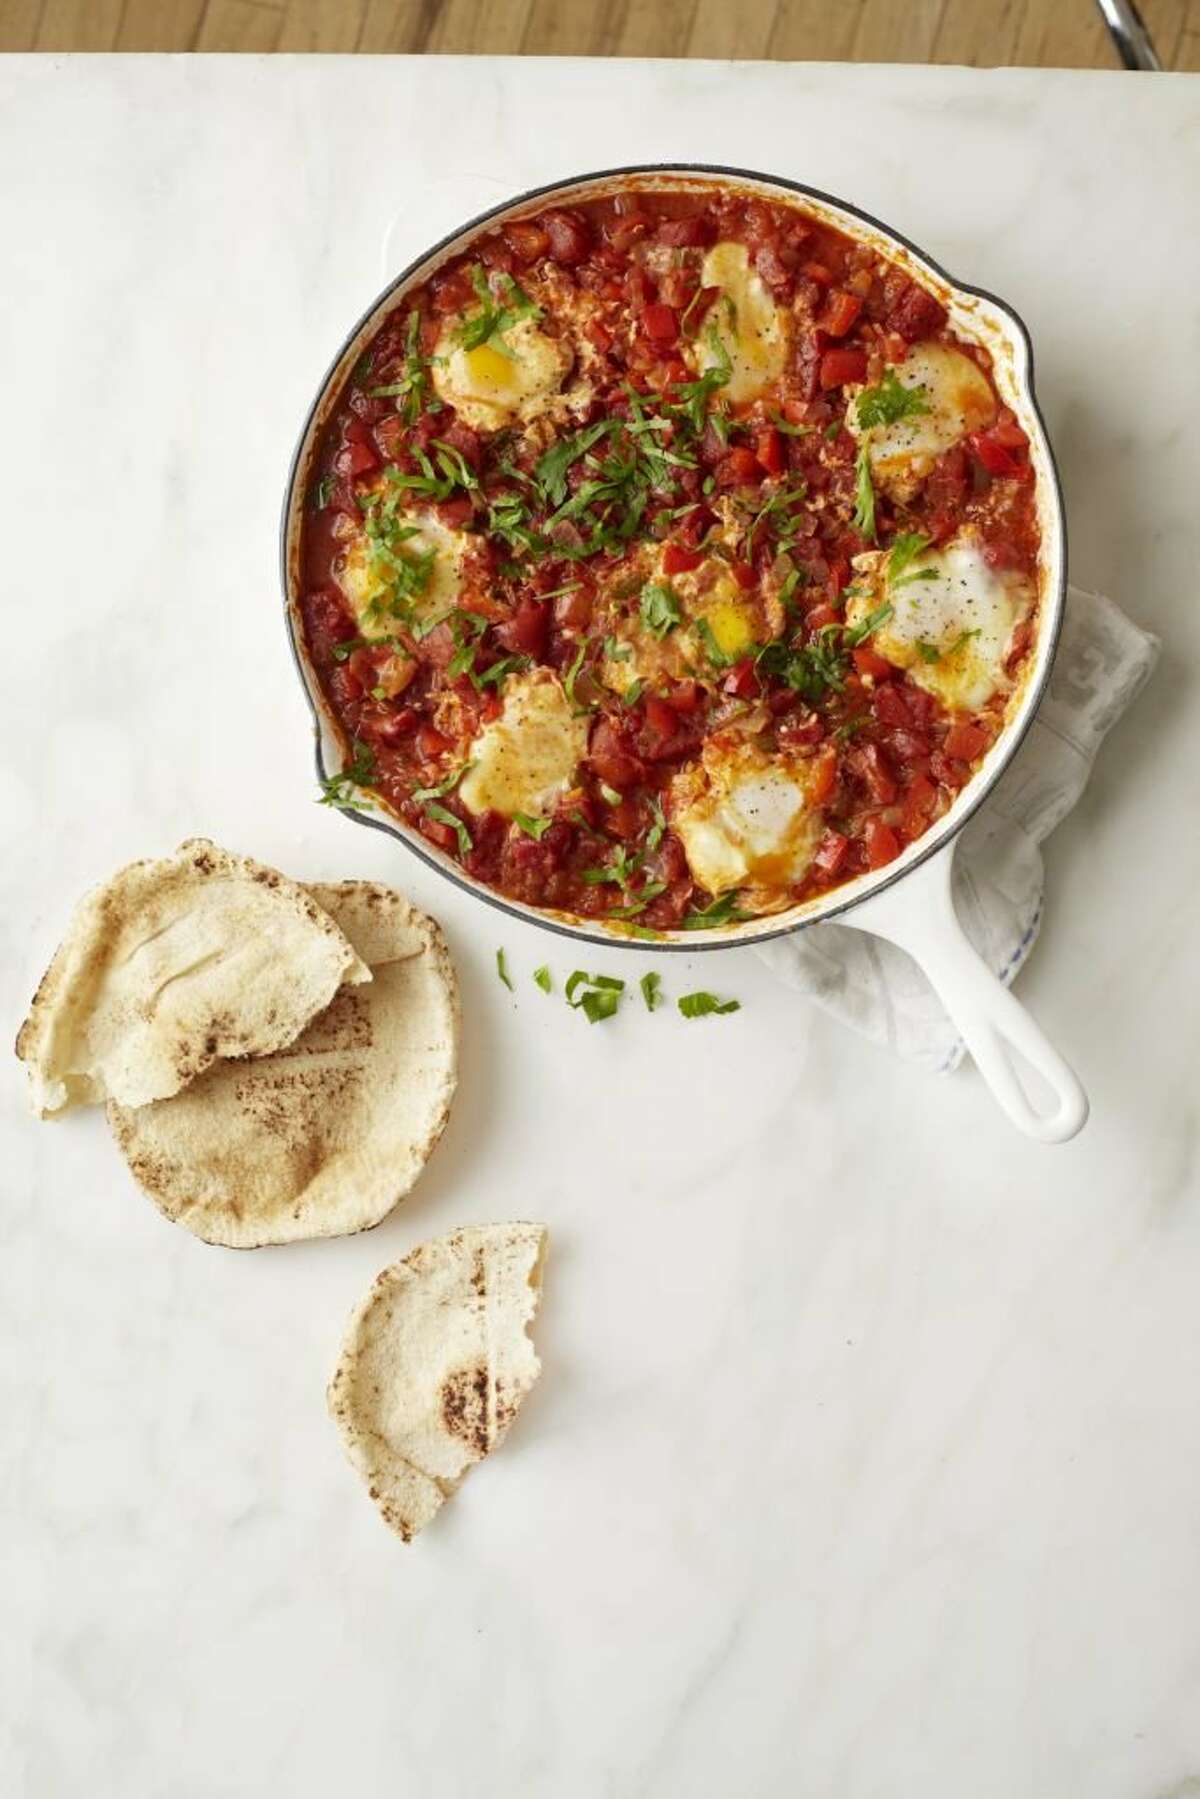 Shakshuka (Eggs in a Spicy Tomato Sauce)